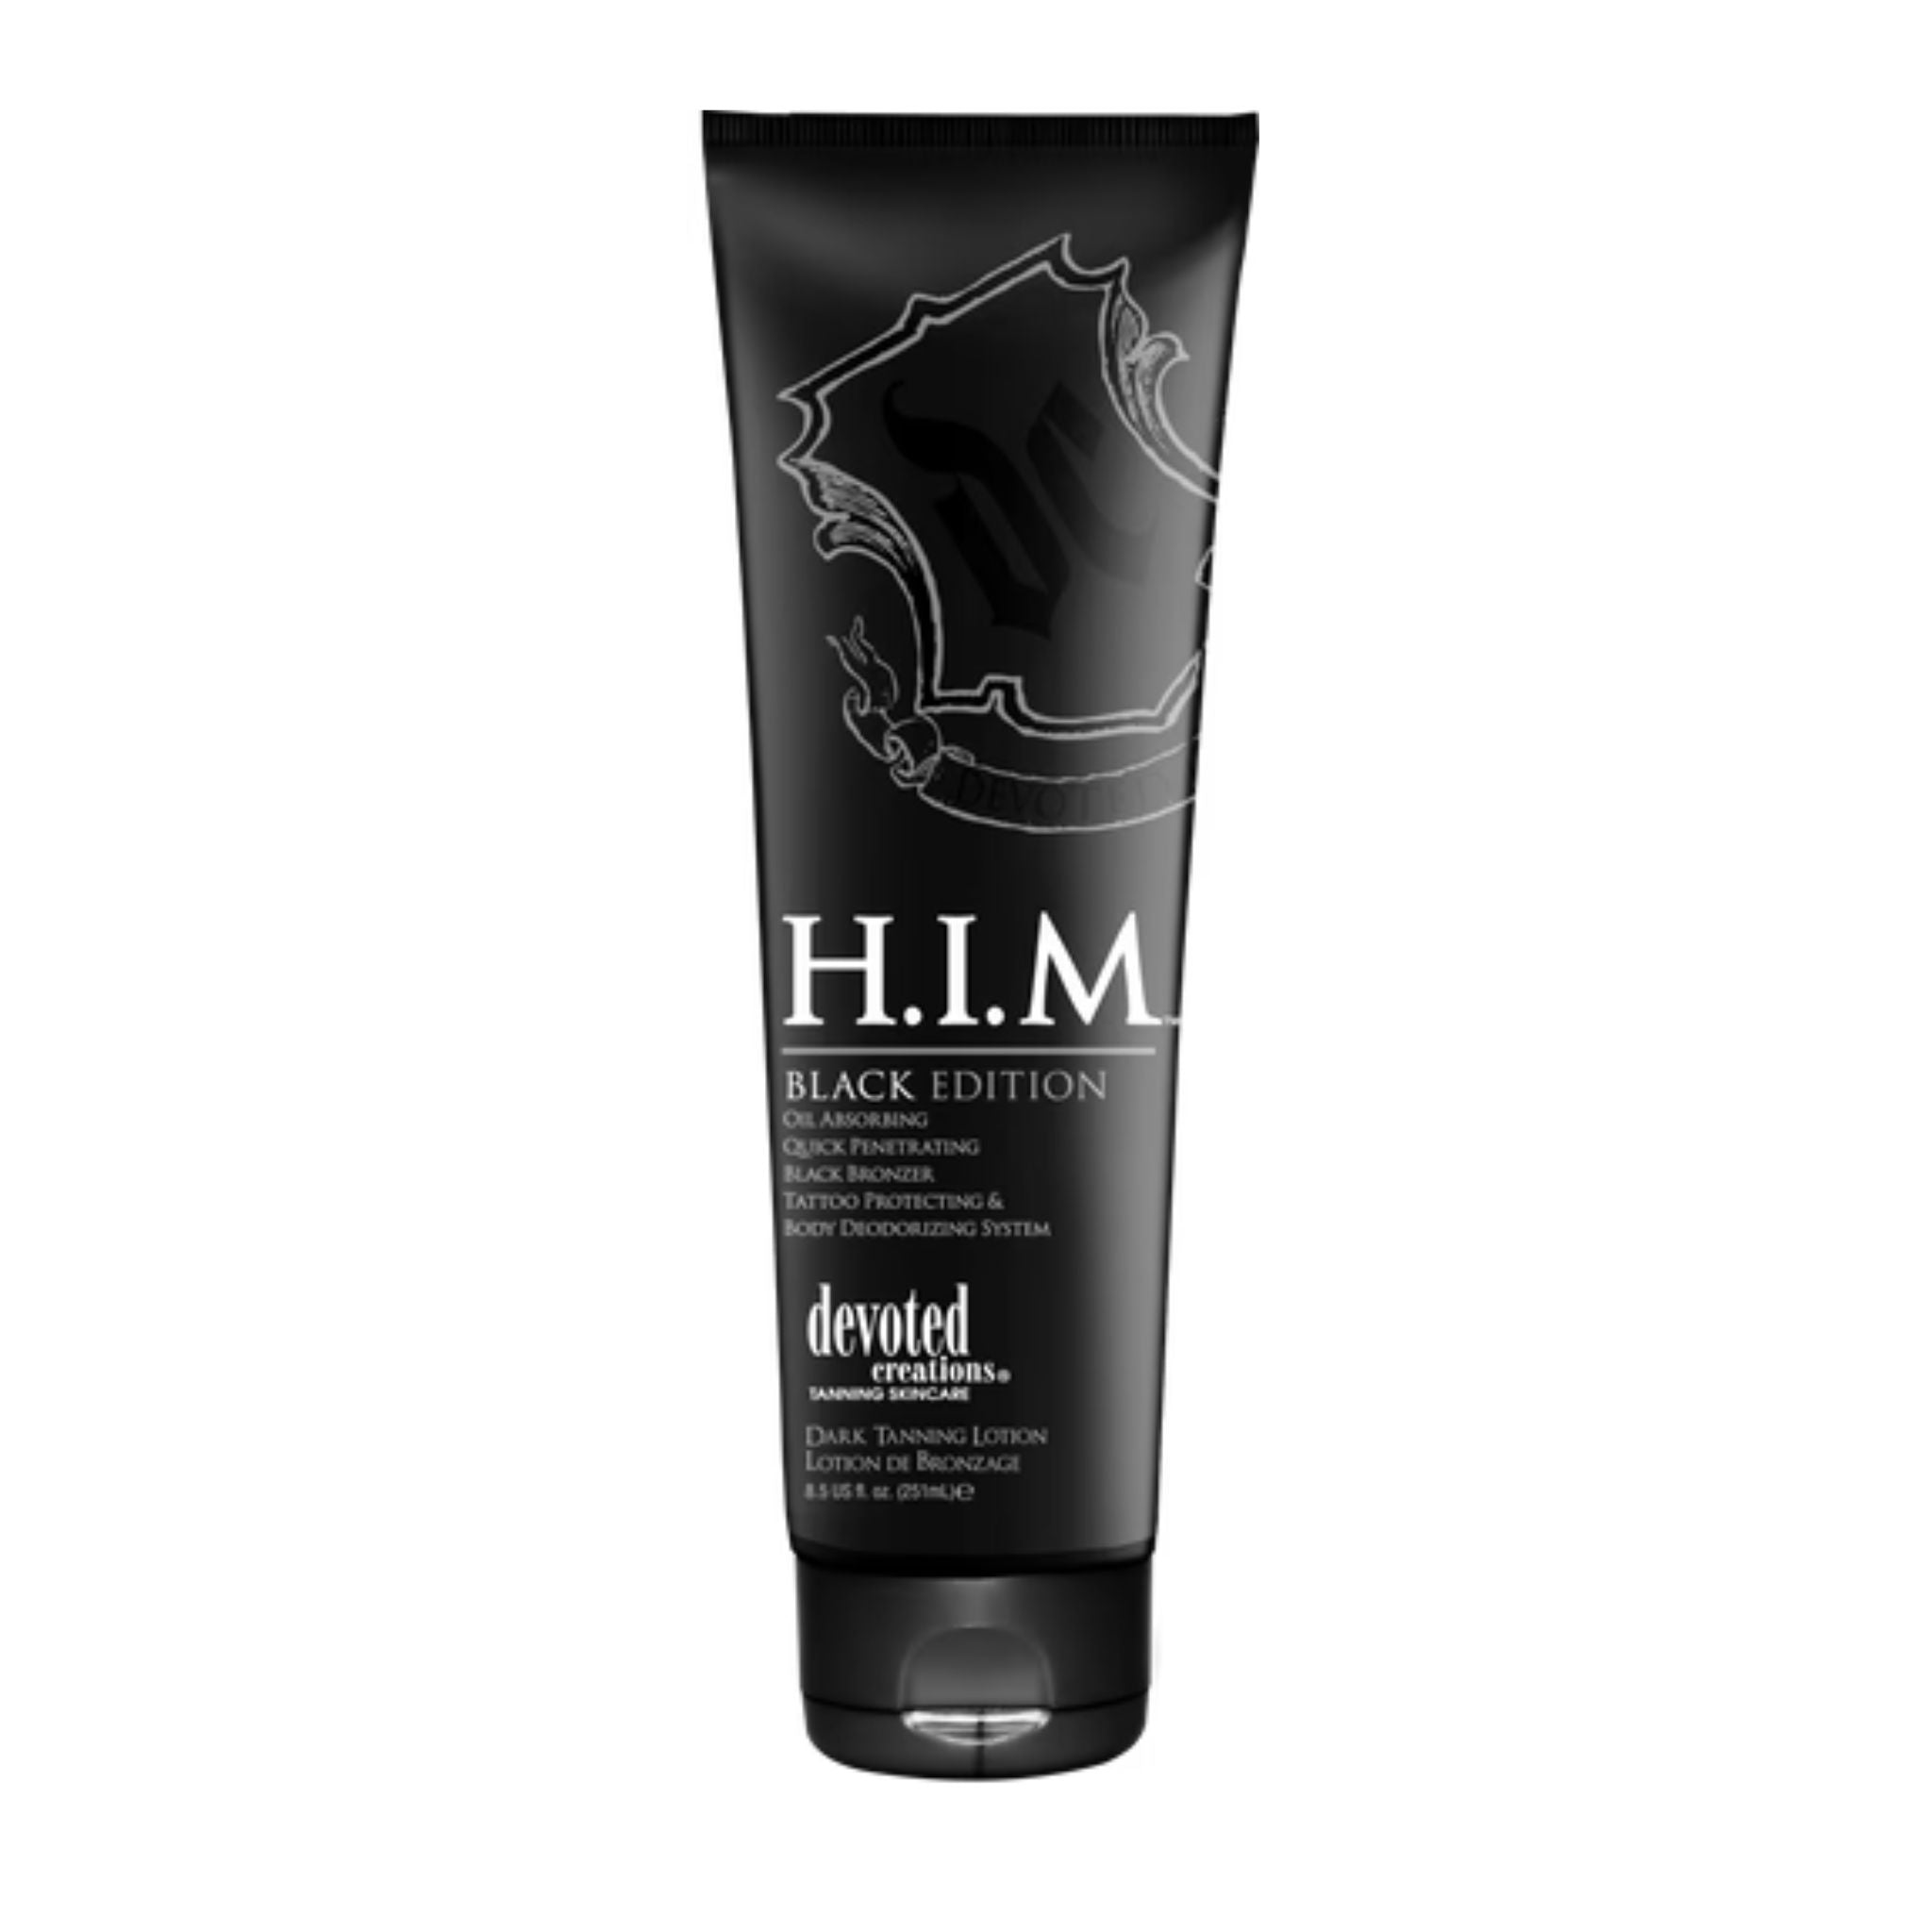 Devoted Creations H.I.M. Black Edition Tanning Lotion